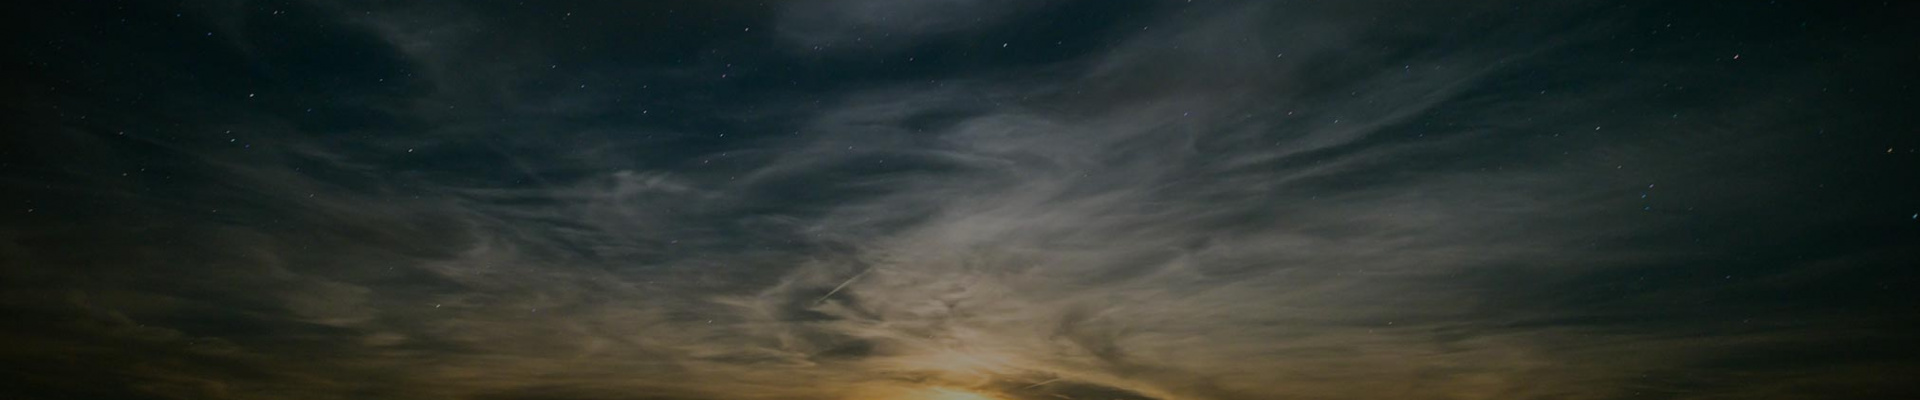 Calm ocean at sunset revealing wispy clouds and dark starry sky.